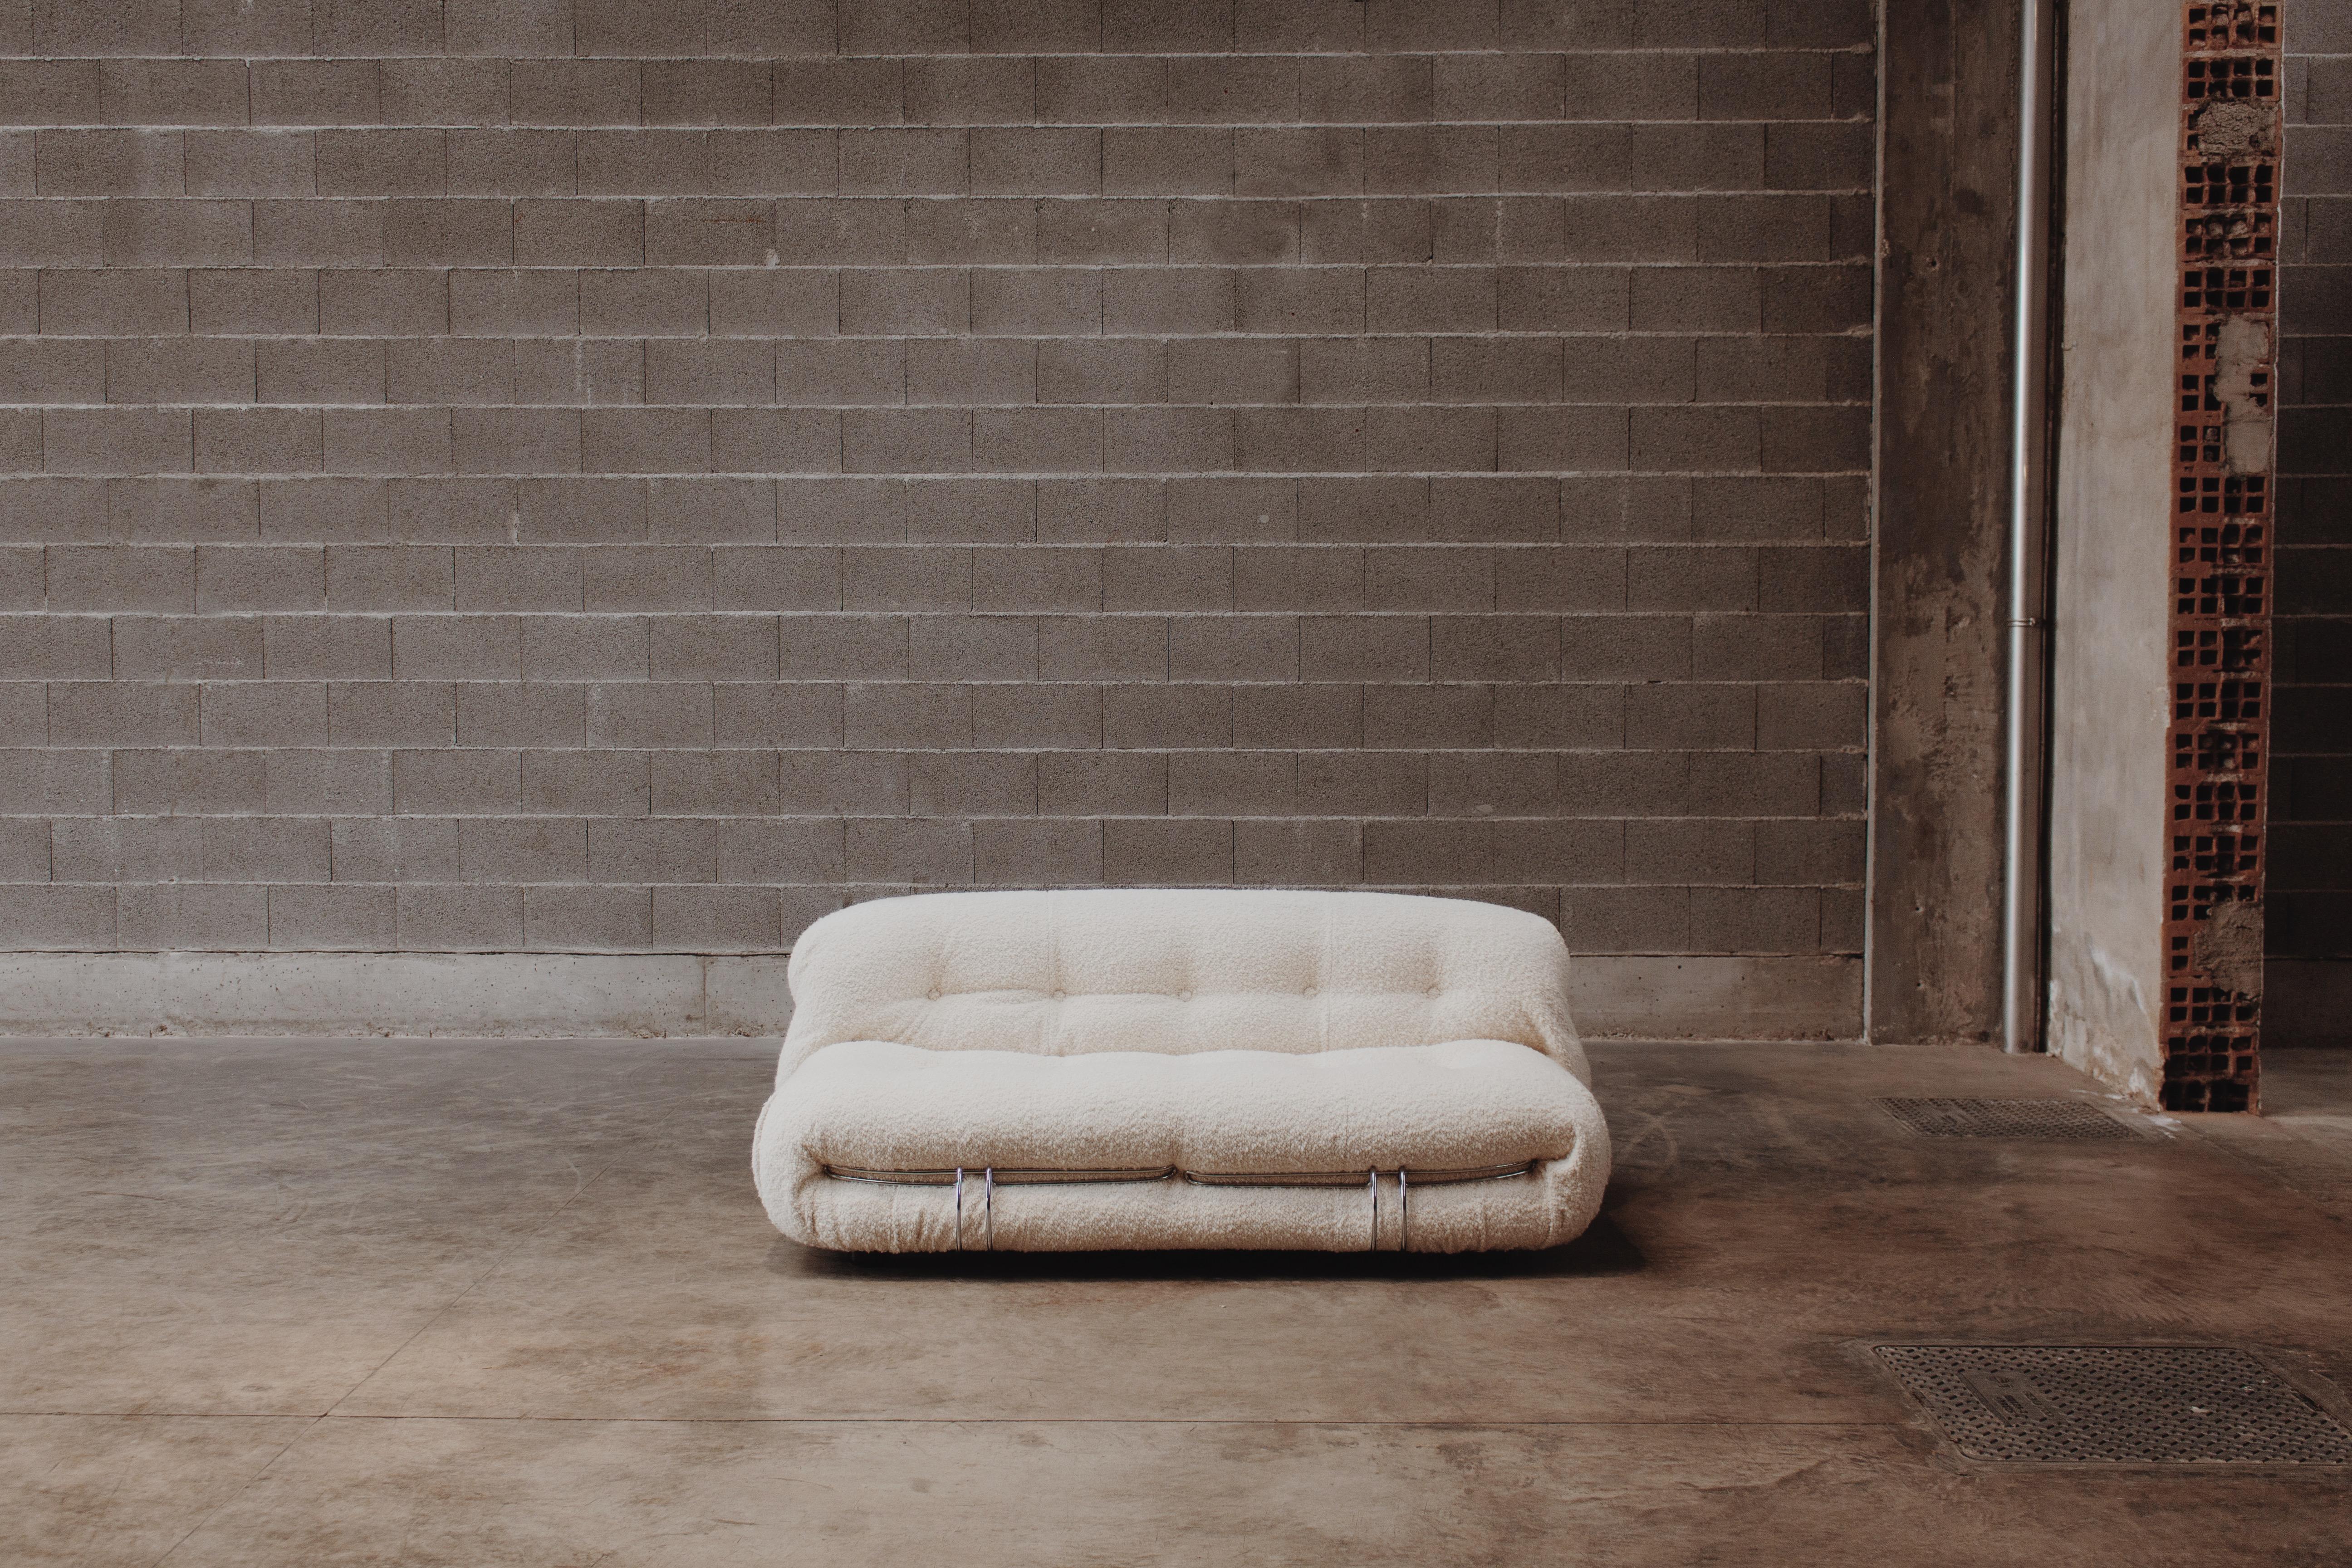 Mid-Century Modern Afra & Tobia Scarpa “Soriana” Sofa for Cassina, Wool Bouclé, 1969 For Sale